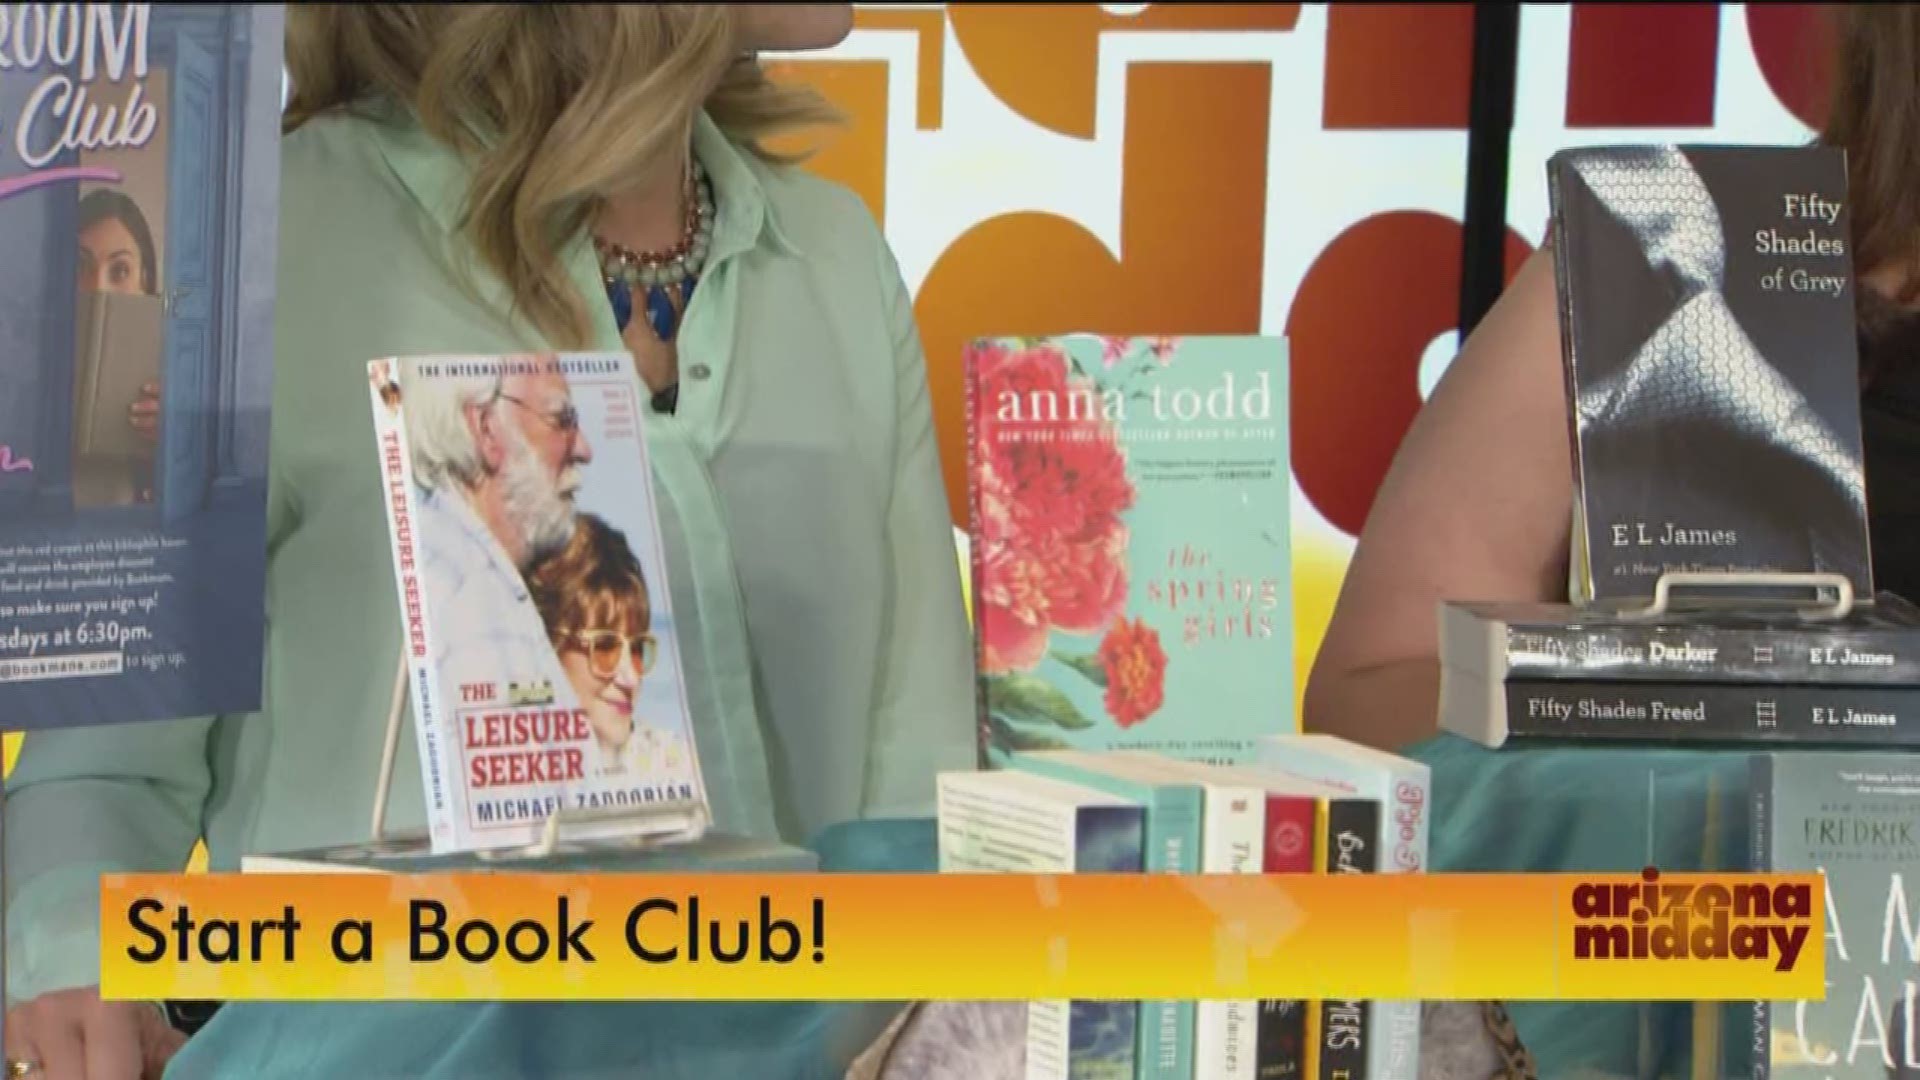 Book Club the movie comes out in May, but you don't have to wait to start your own! Bookmans Entertainment Exchange has all you need and Amy Edrozo told us how to get going.